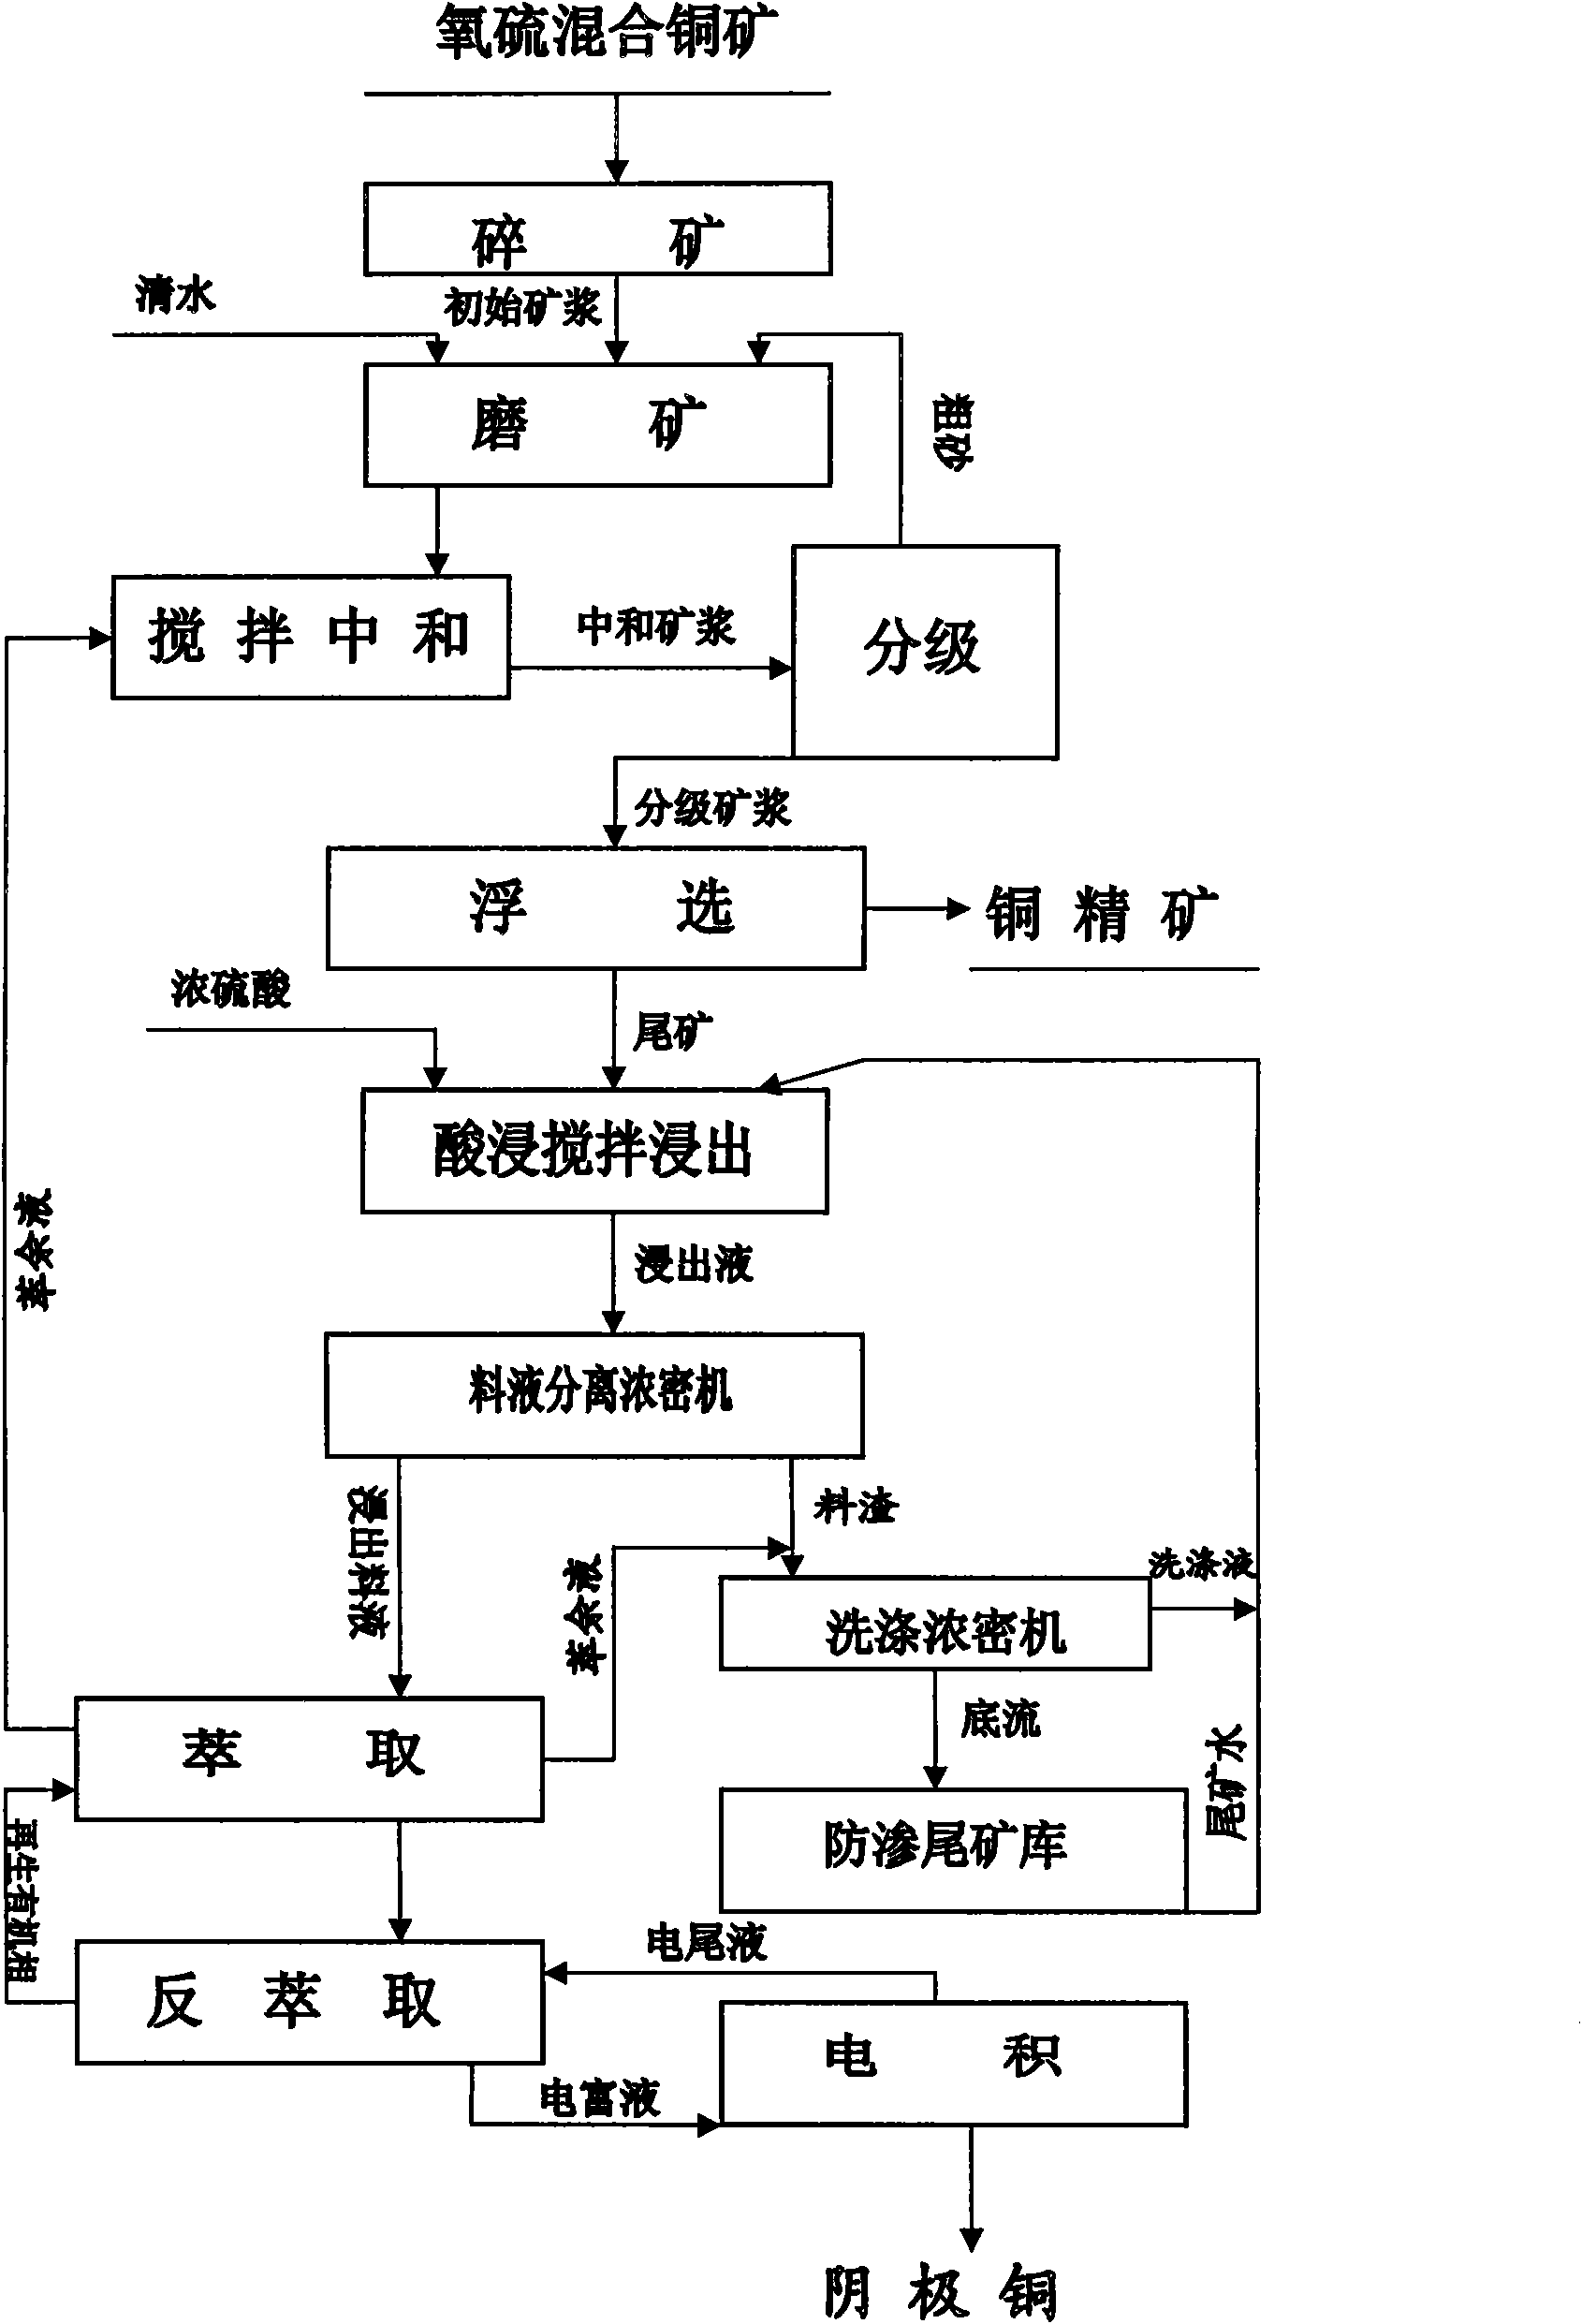 Combined concentration and smelting method for mixed copper ore